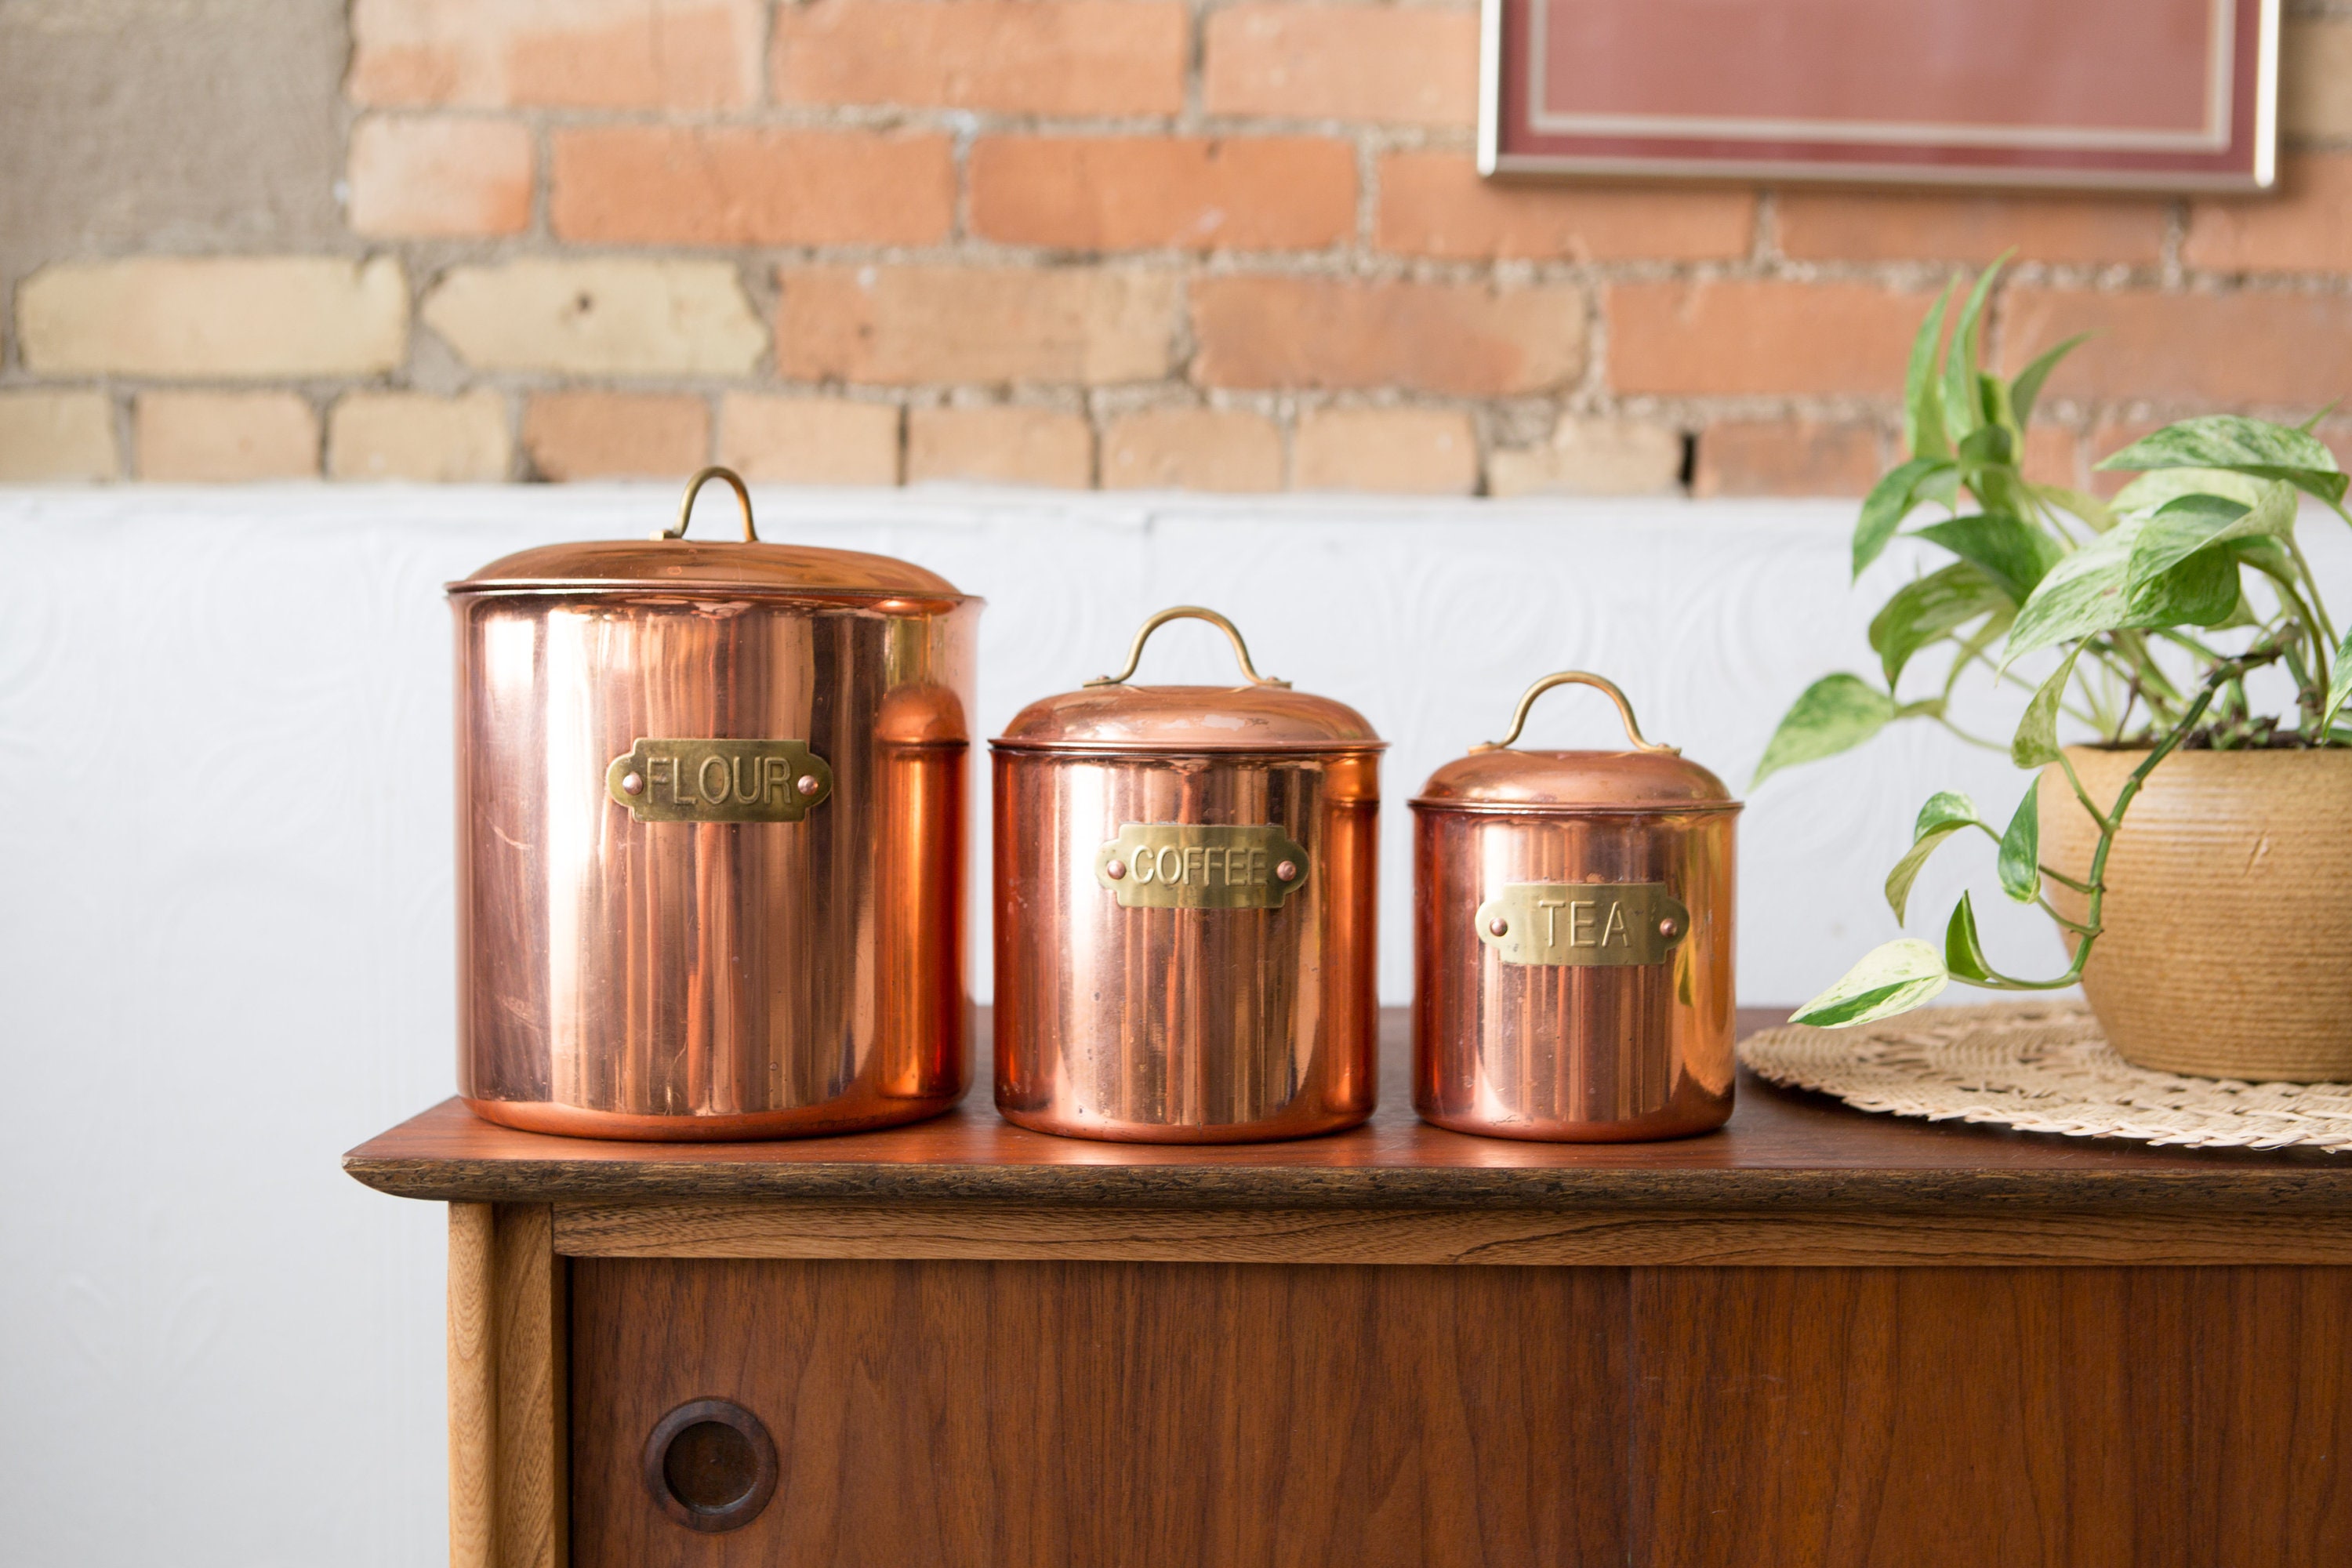 Vintage Copper Kitchen Canisters - thewhitebuffalostylingco.com - Copper  decor, Copper kitchen canisters, Kitchen canisters